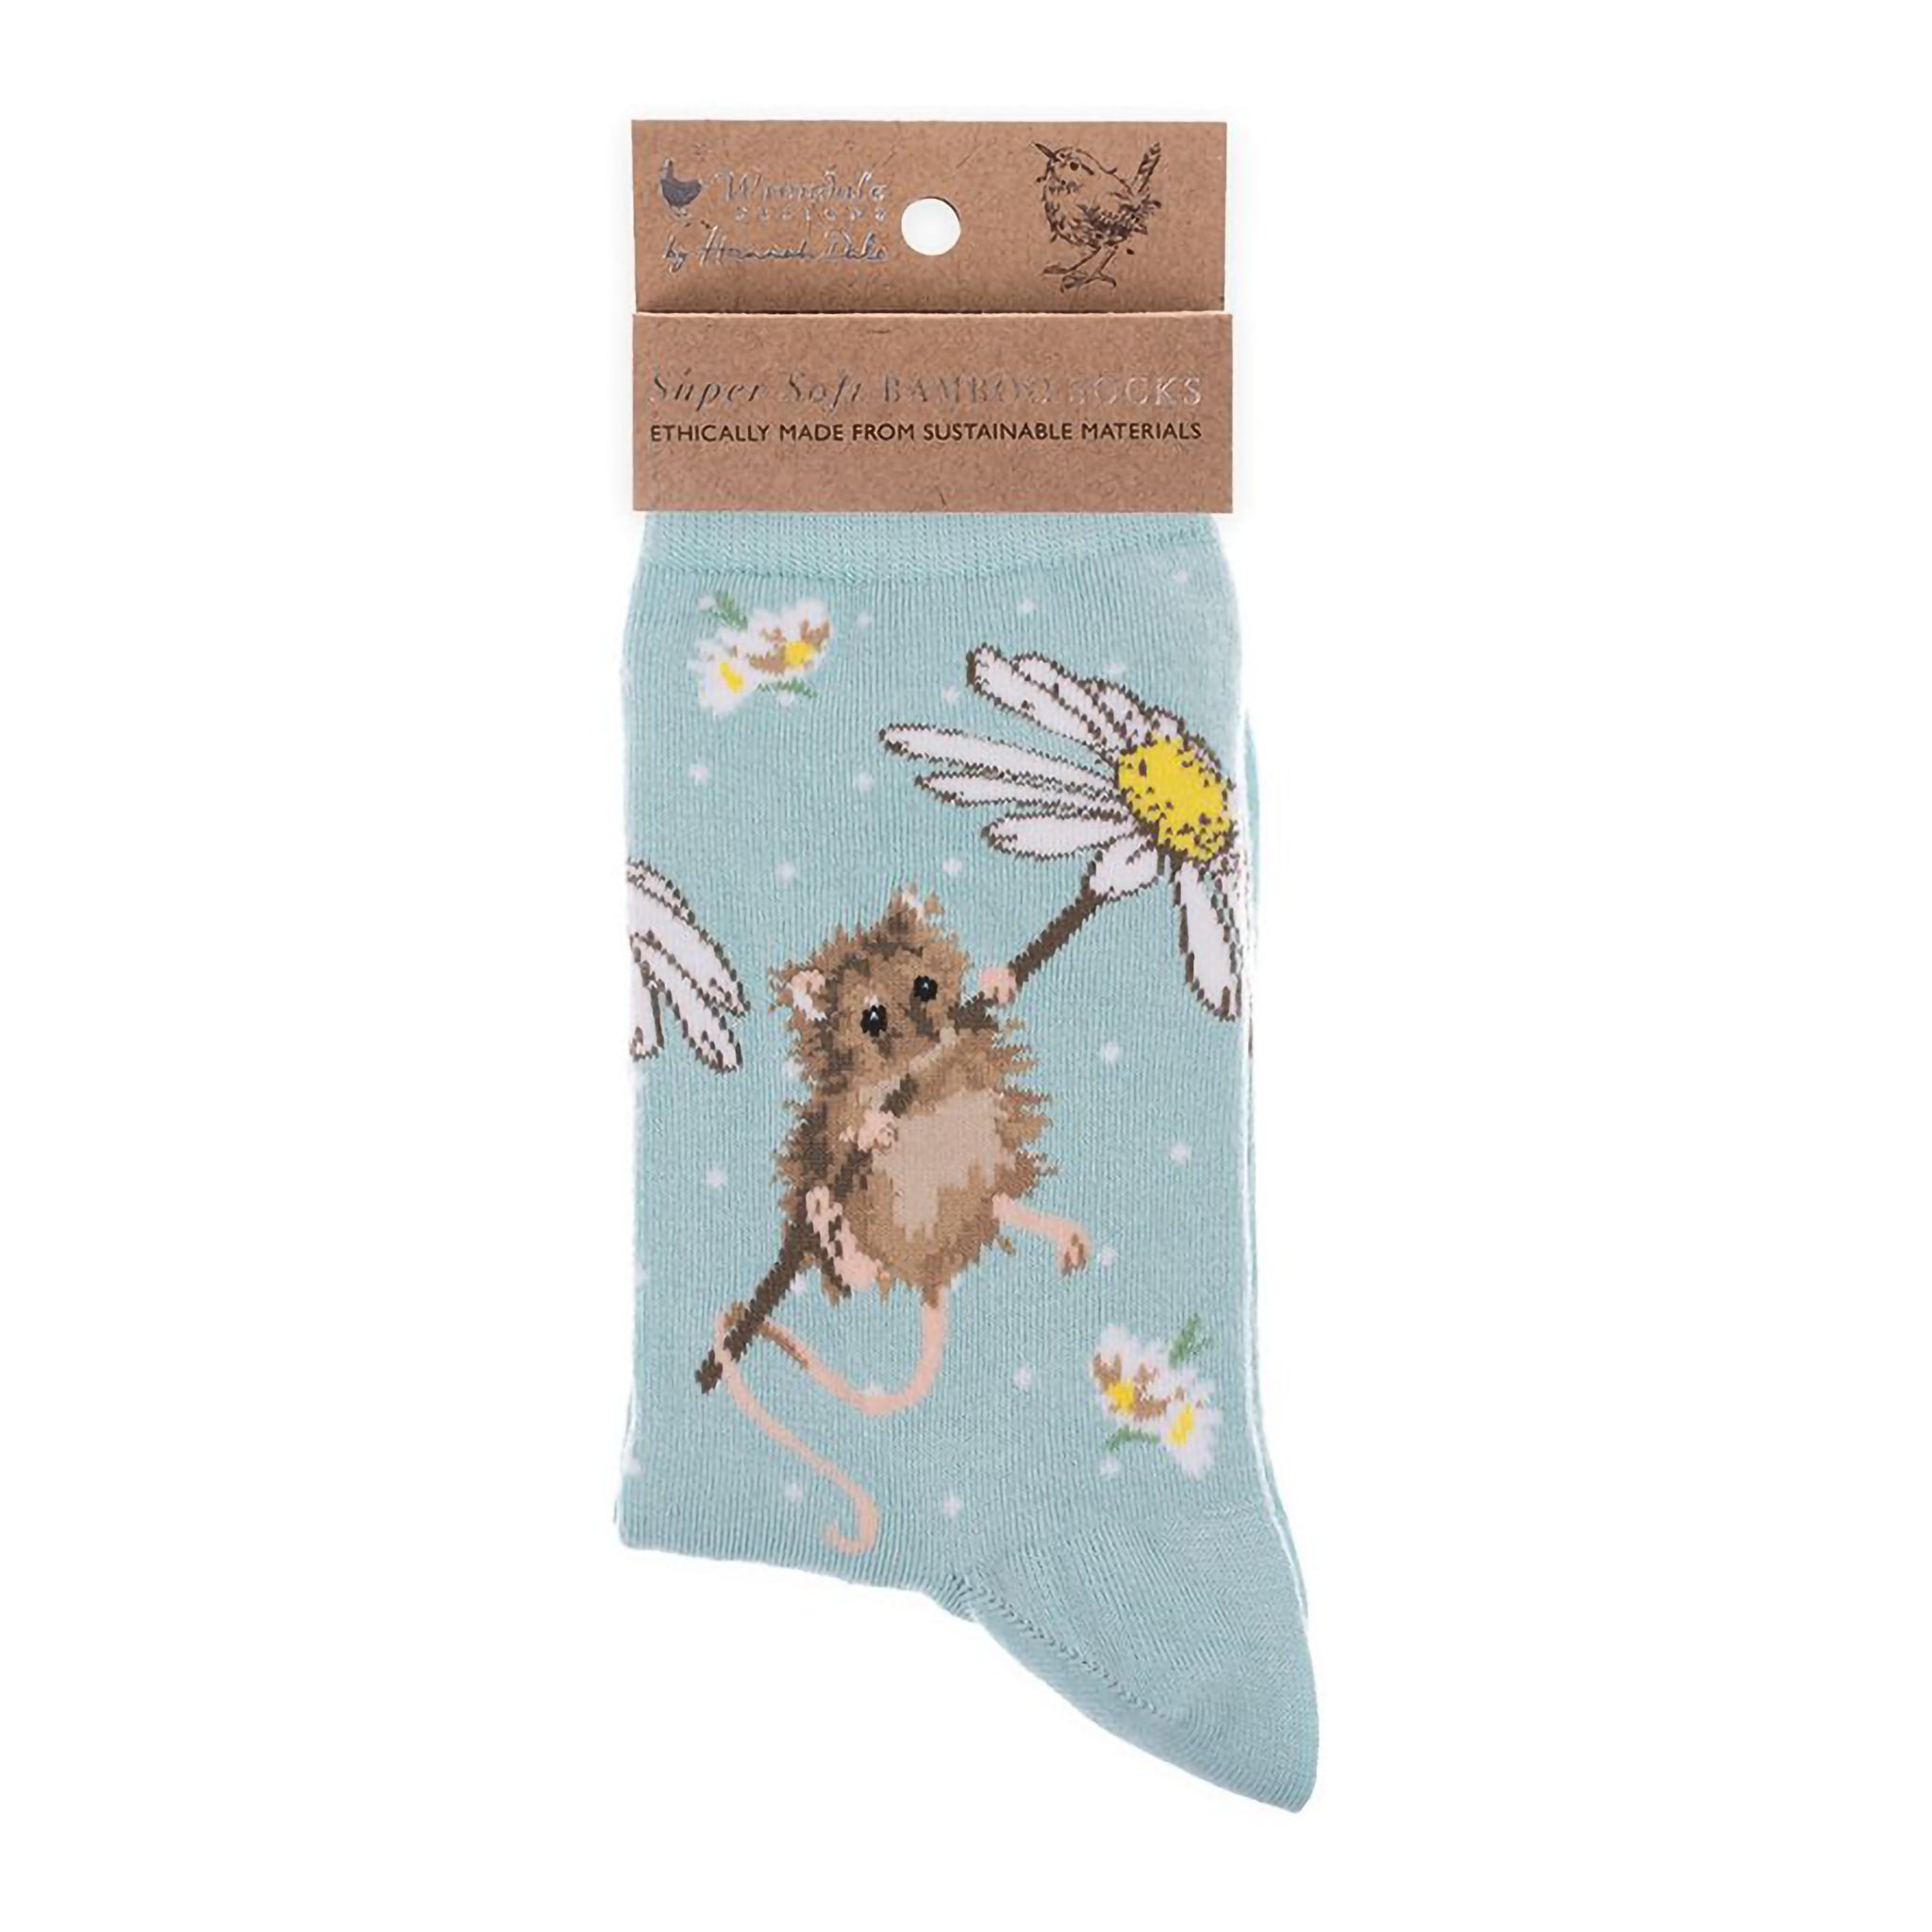 Folded pair of light blue socks with a mouse holding a daisy picture and white polka dots